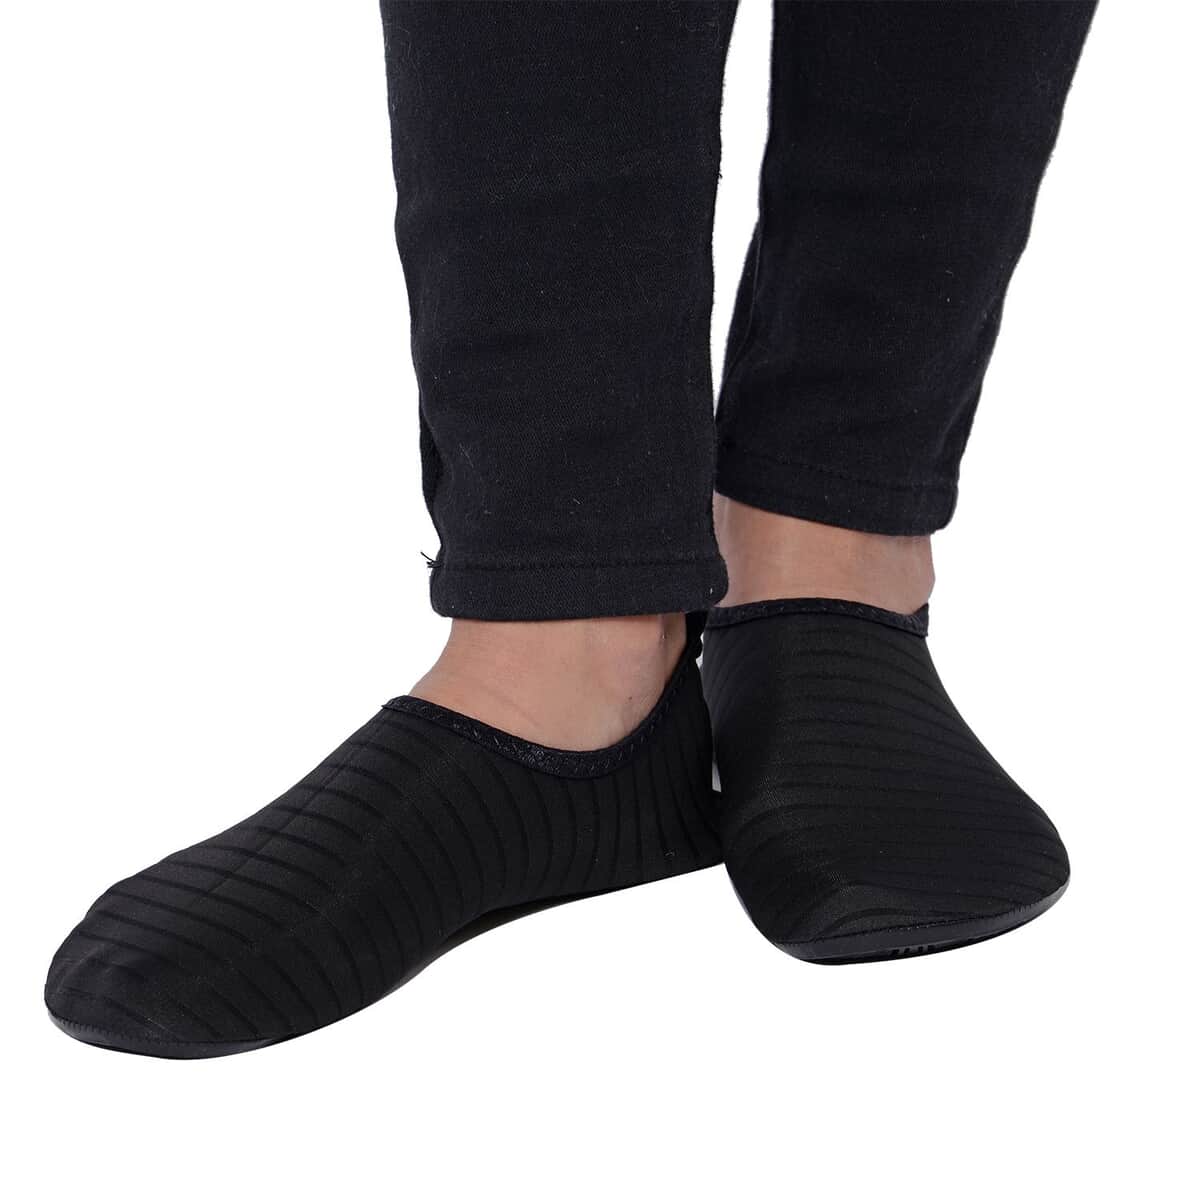 Black Women's and Men's Water Shoes Barefoot Quick-Dry Aqua Socks image number 0